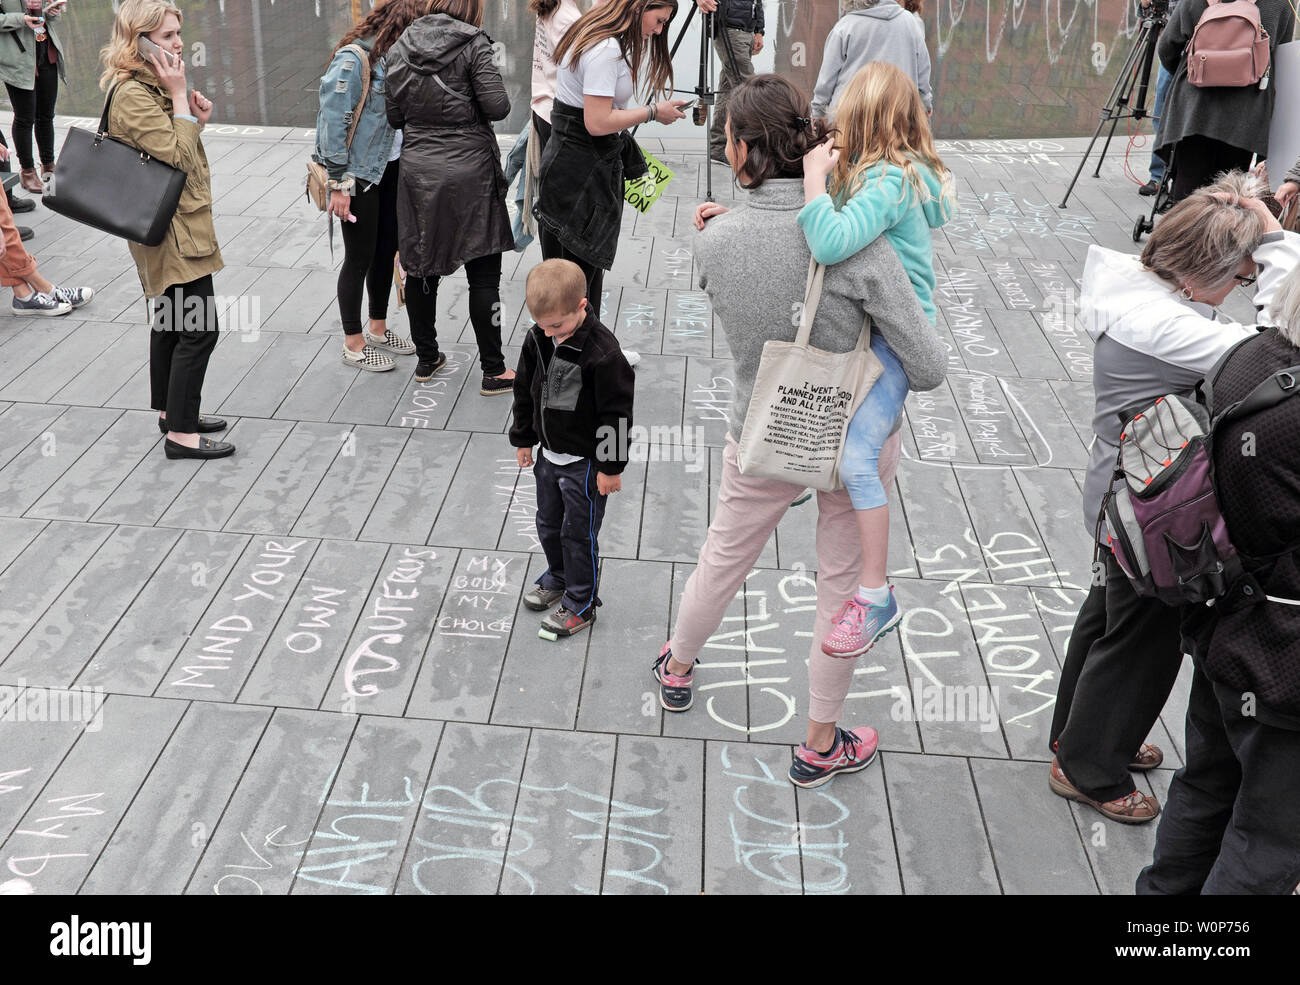 A child reads the chalk message 'My Body My Choice' while surrounded by pro-choice rally goers on May 21, 2019 during the Women's Rights Rally. Stock Photo